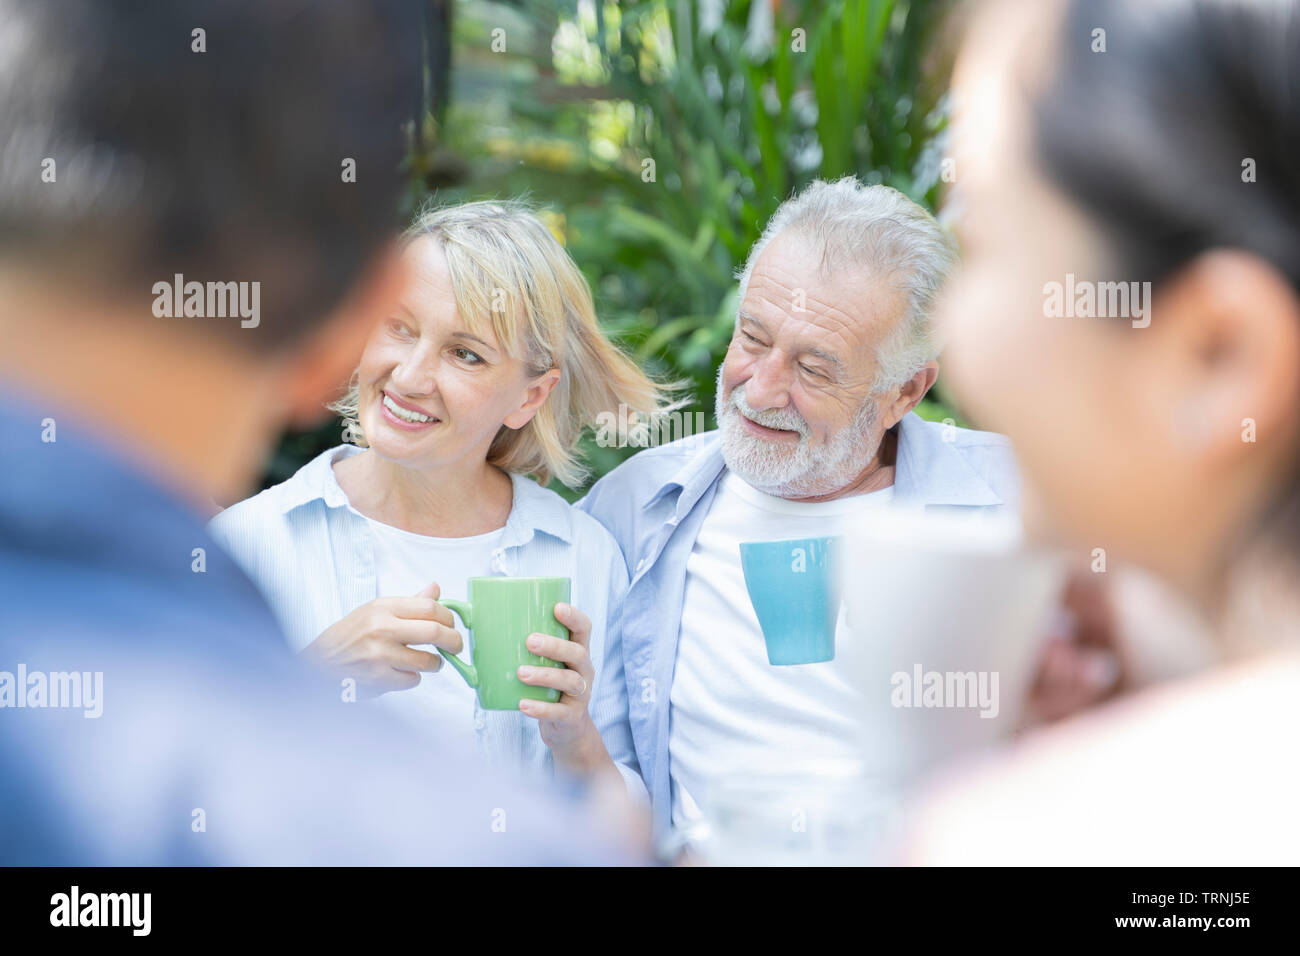 Happy moments. Joyful retirement age nice couple having tea and laughing while enjoying their time together - Image Stock Photo